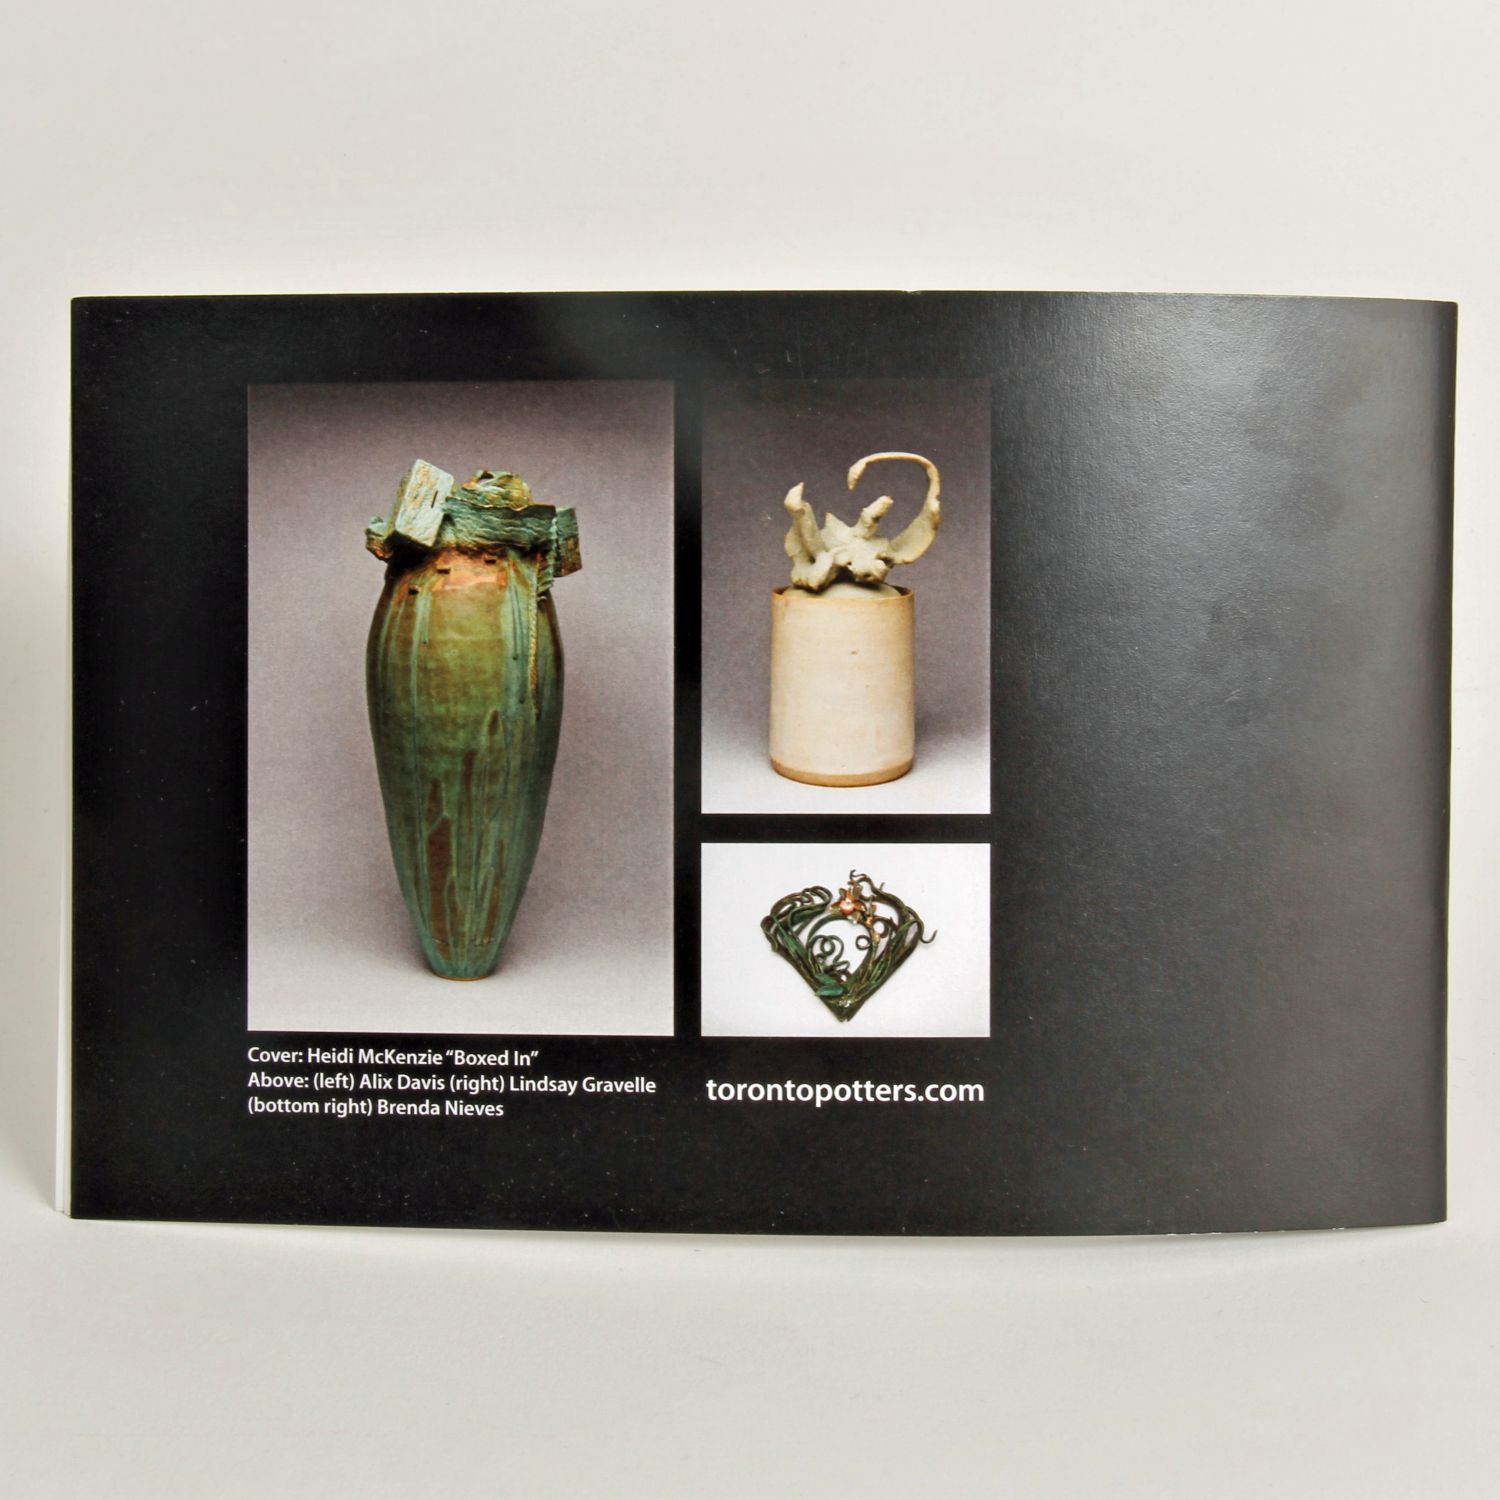 21 st Biennial Exhibition: Toronto Potters Catalogue Product Image 2 of 6